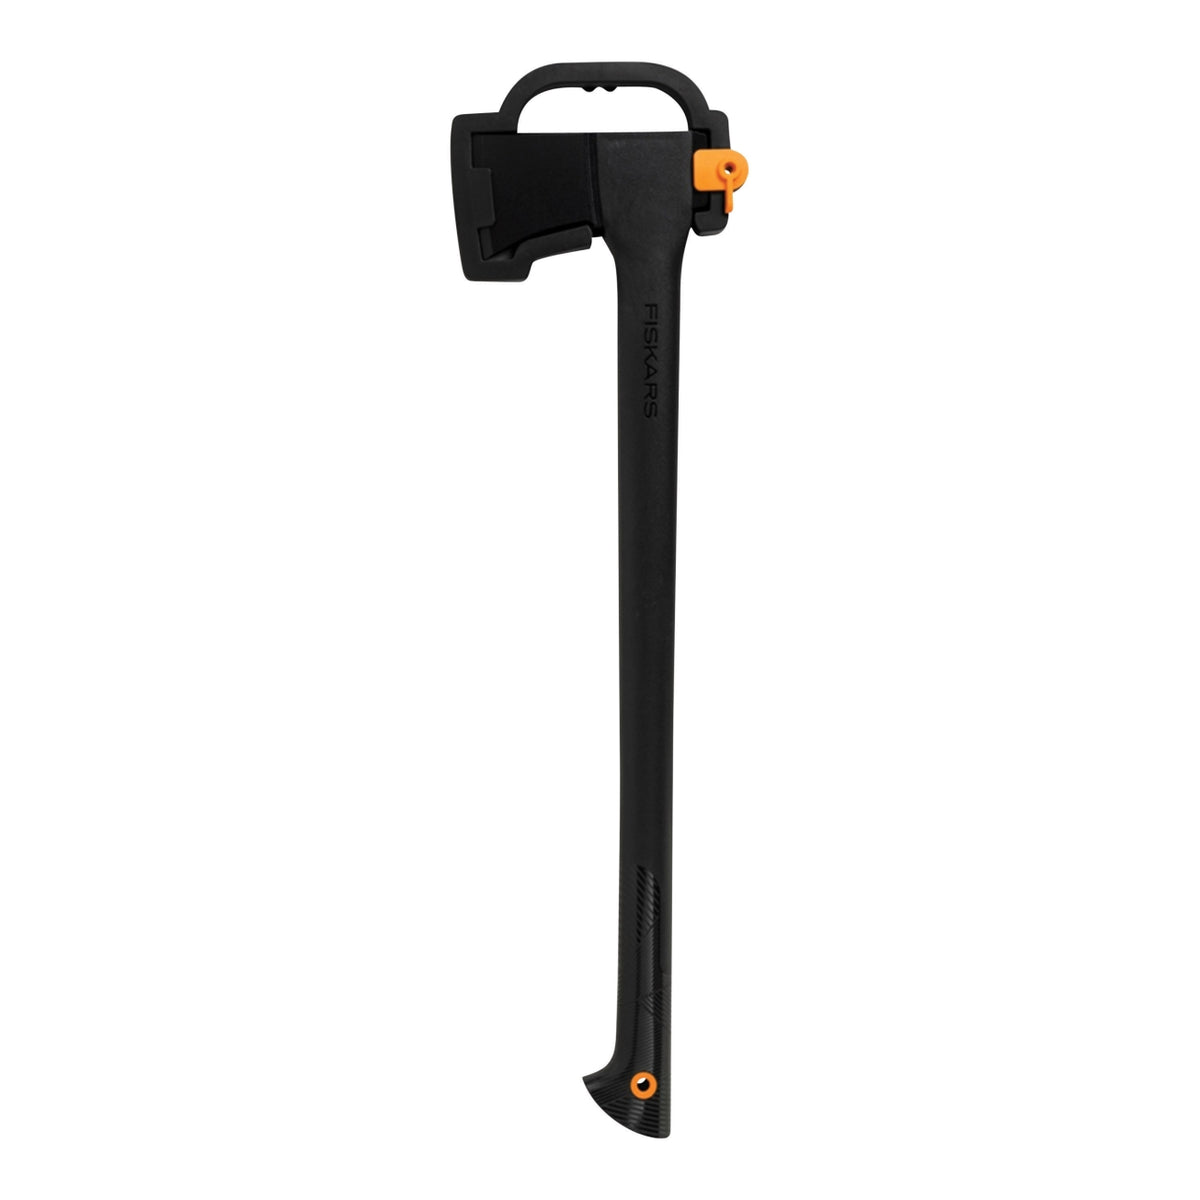 Buy fiskars 375581-1001 - Online store for lawn & garden tools, axes in USA, on sale, low price, discount deals, coupon code